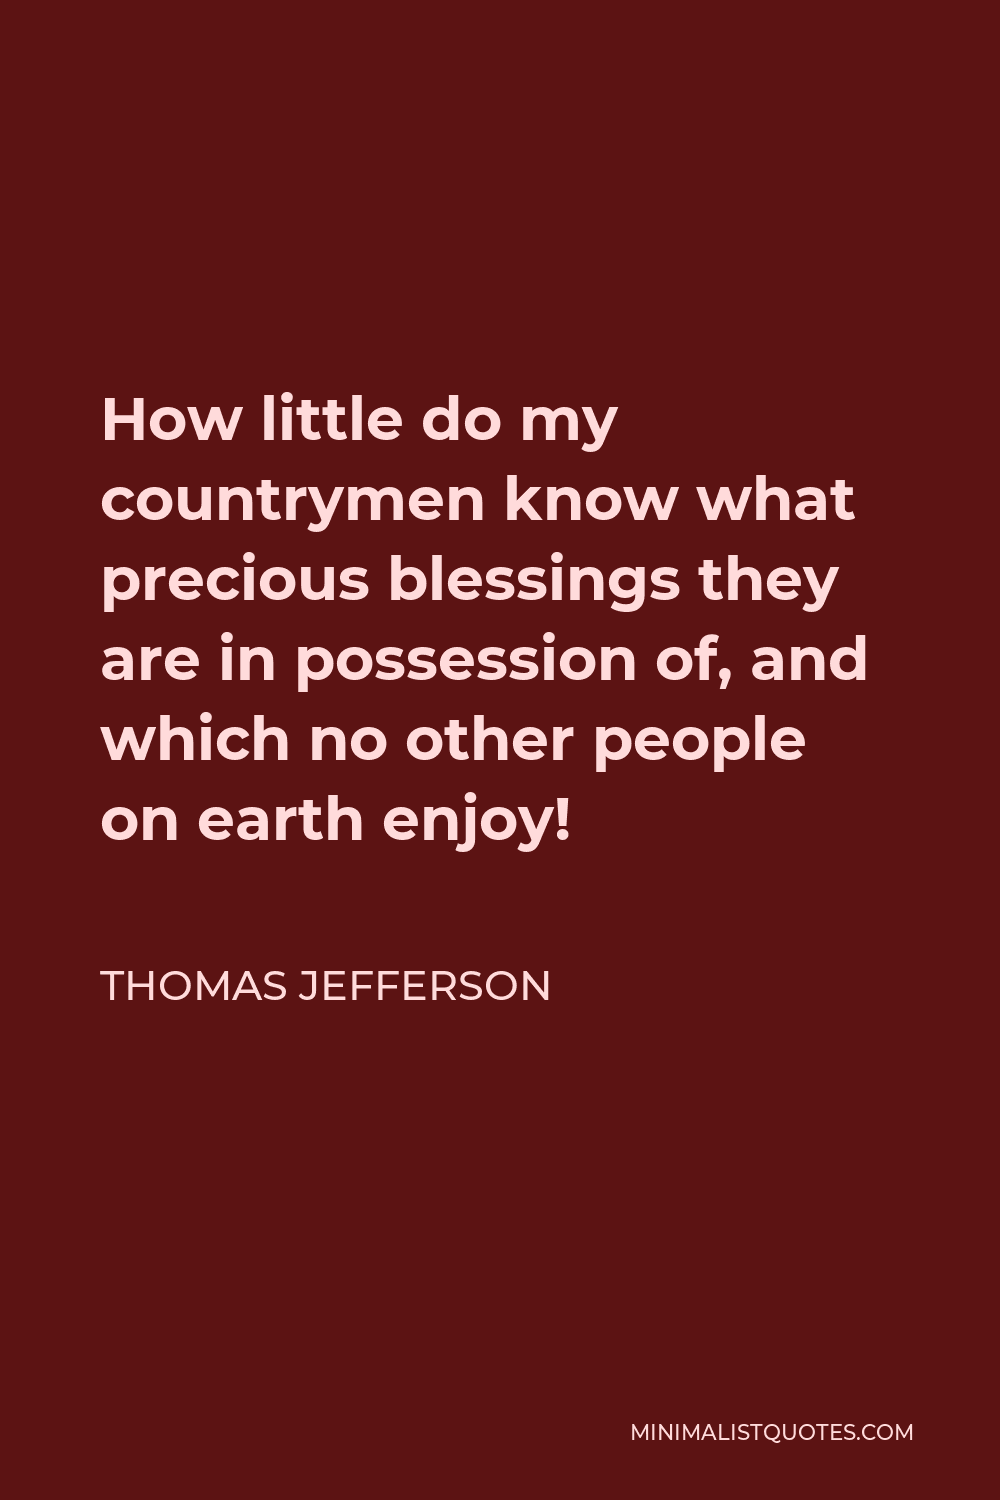 Thomas Jefferson Quote - How little do my countrymen know what precious blessings they are in possession of, and which no other people on earth enjoy!